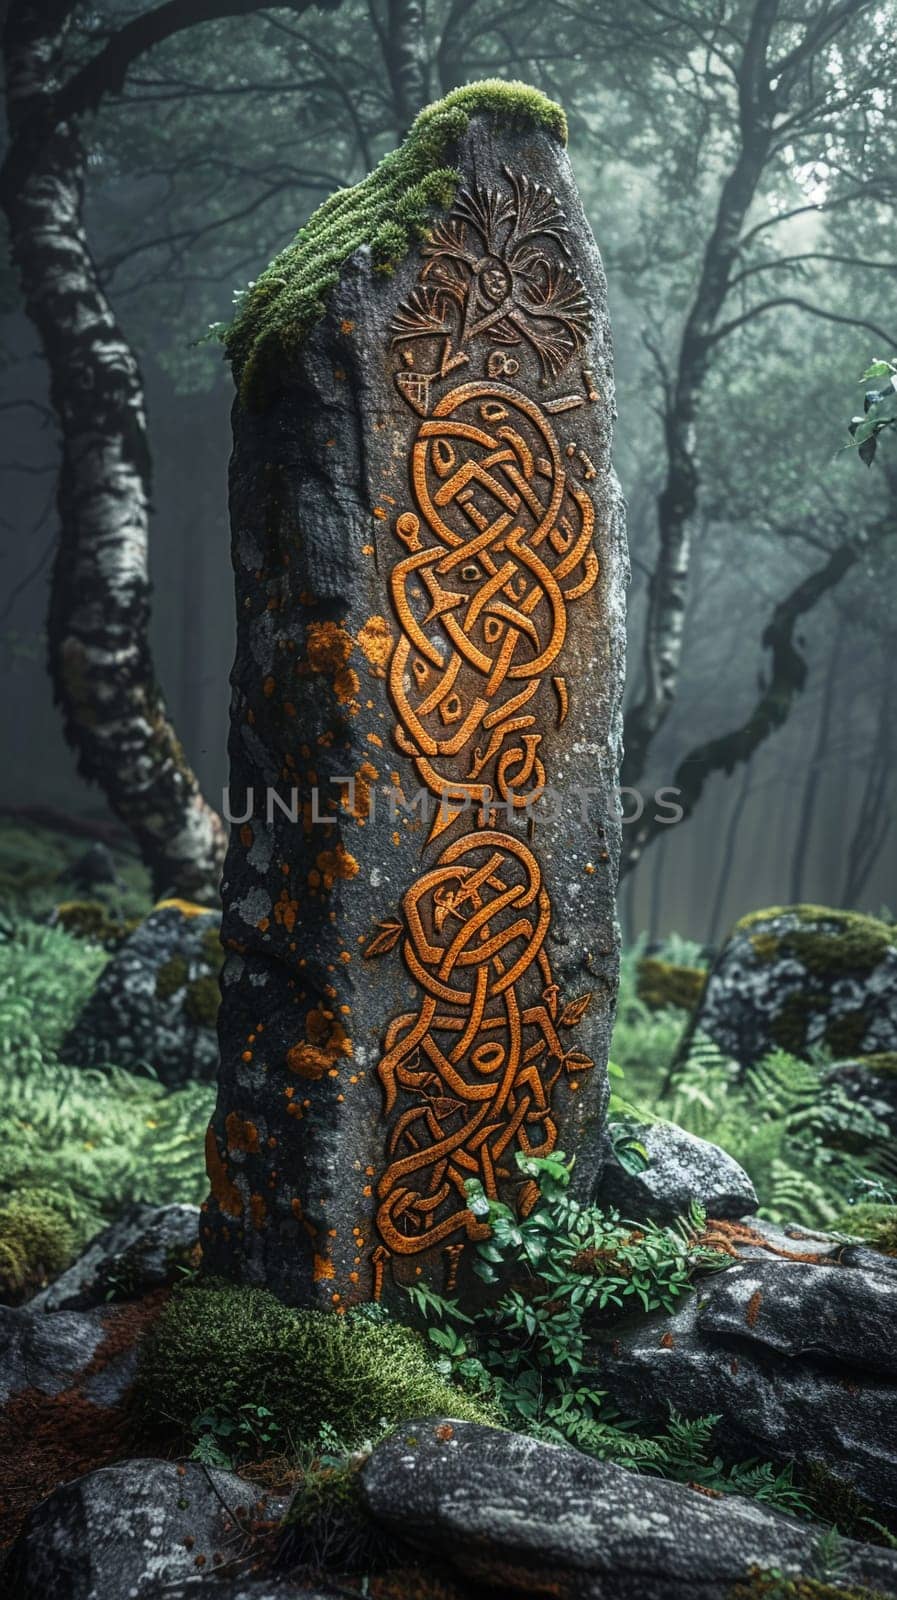 Viking Runestones Whispering Ancient Nordic Lore, The runes blur into rock, carrying the weight of myths and ancestral wisdom.